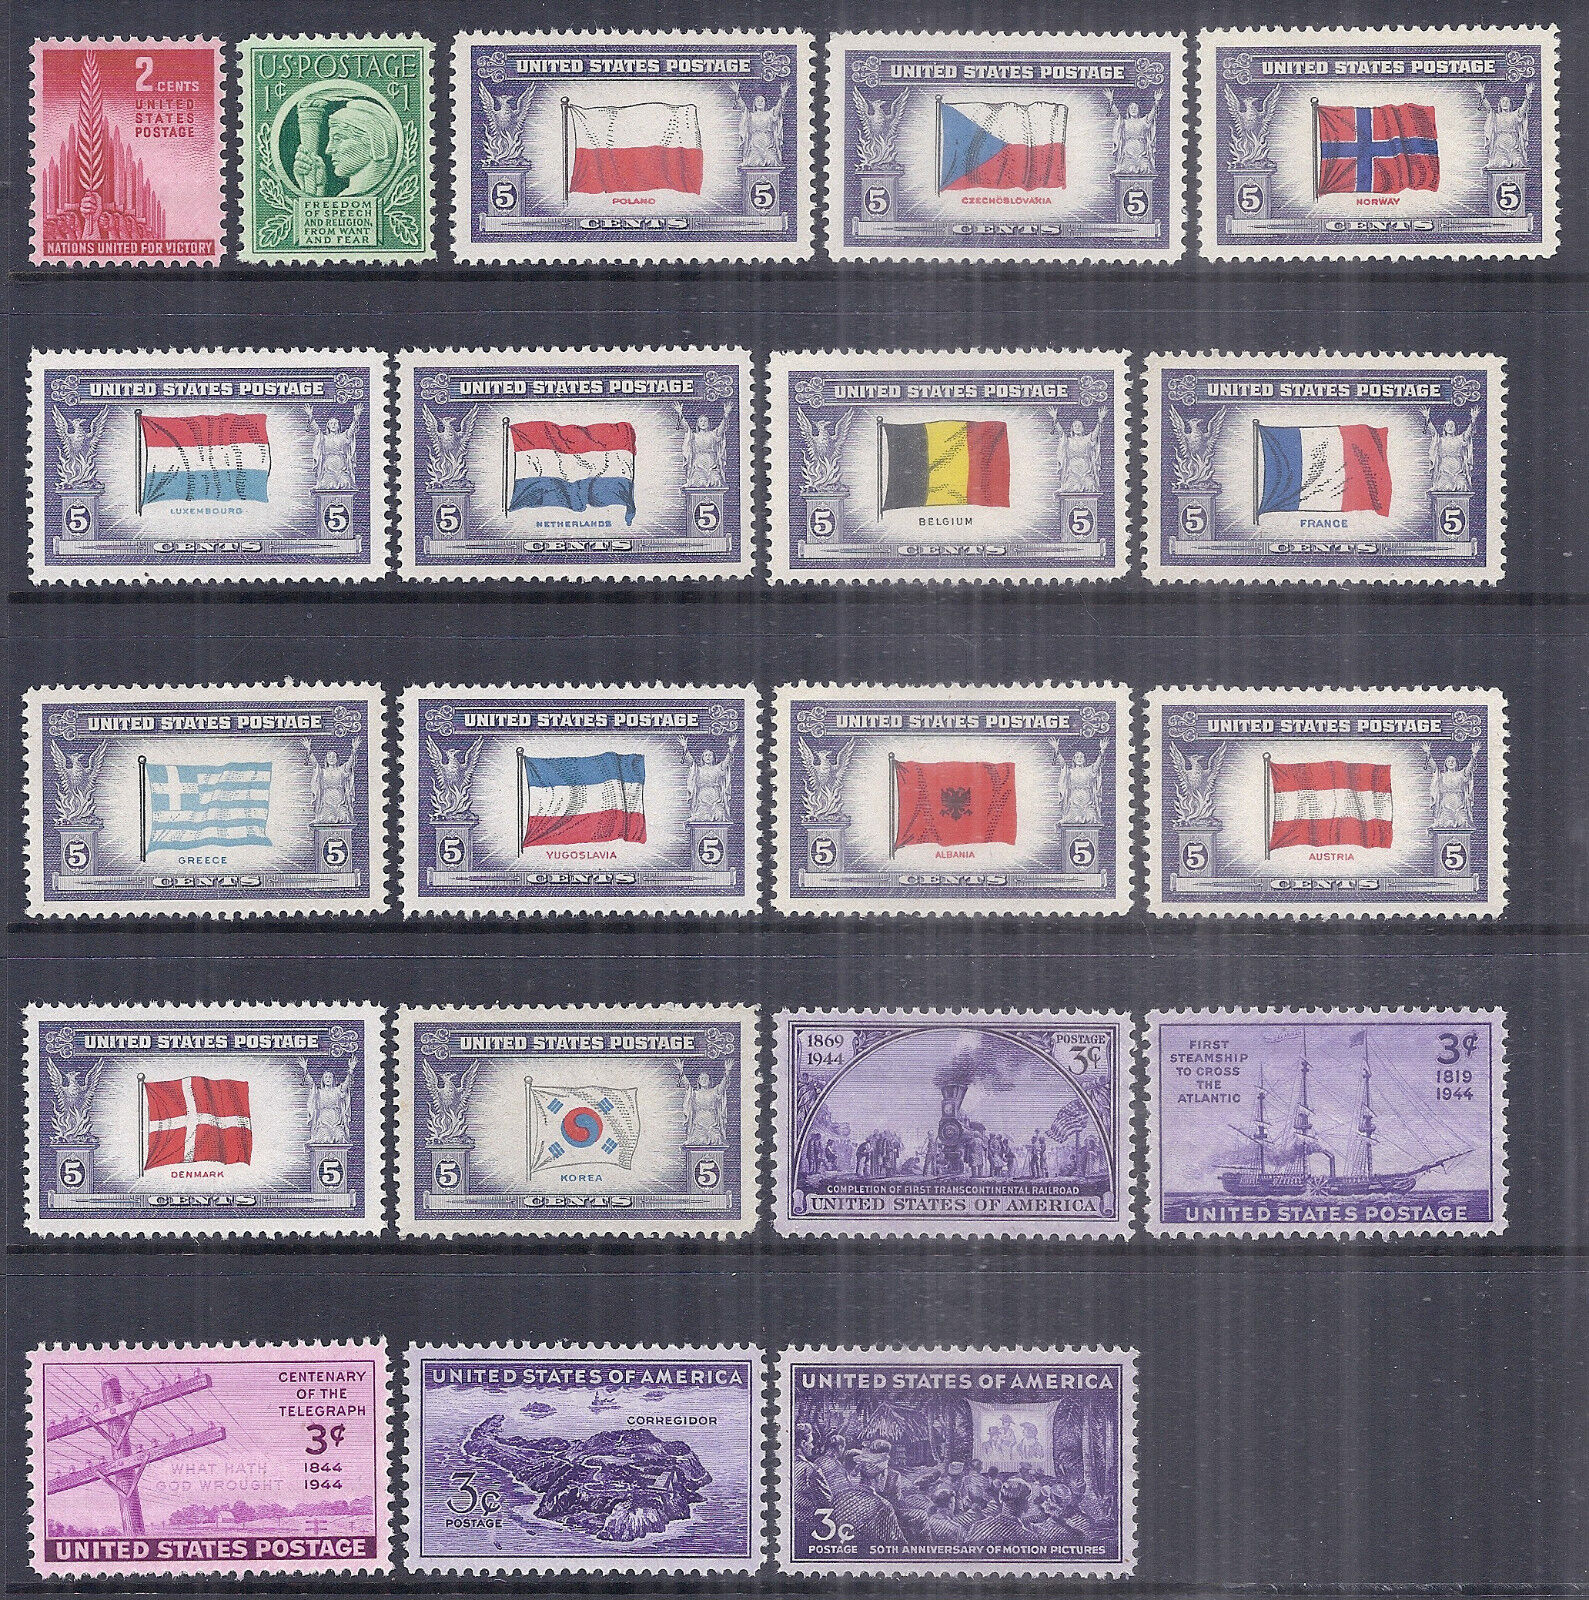 US 1943-1944 Commemorative Year Set w/ Overrun Countries 909-921 - MNH*